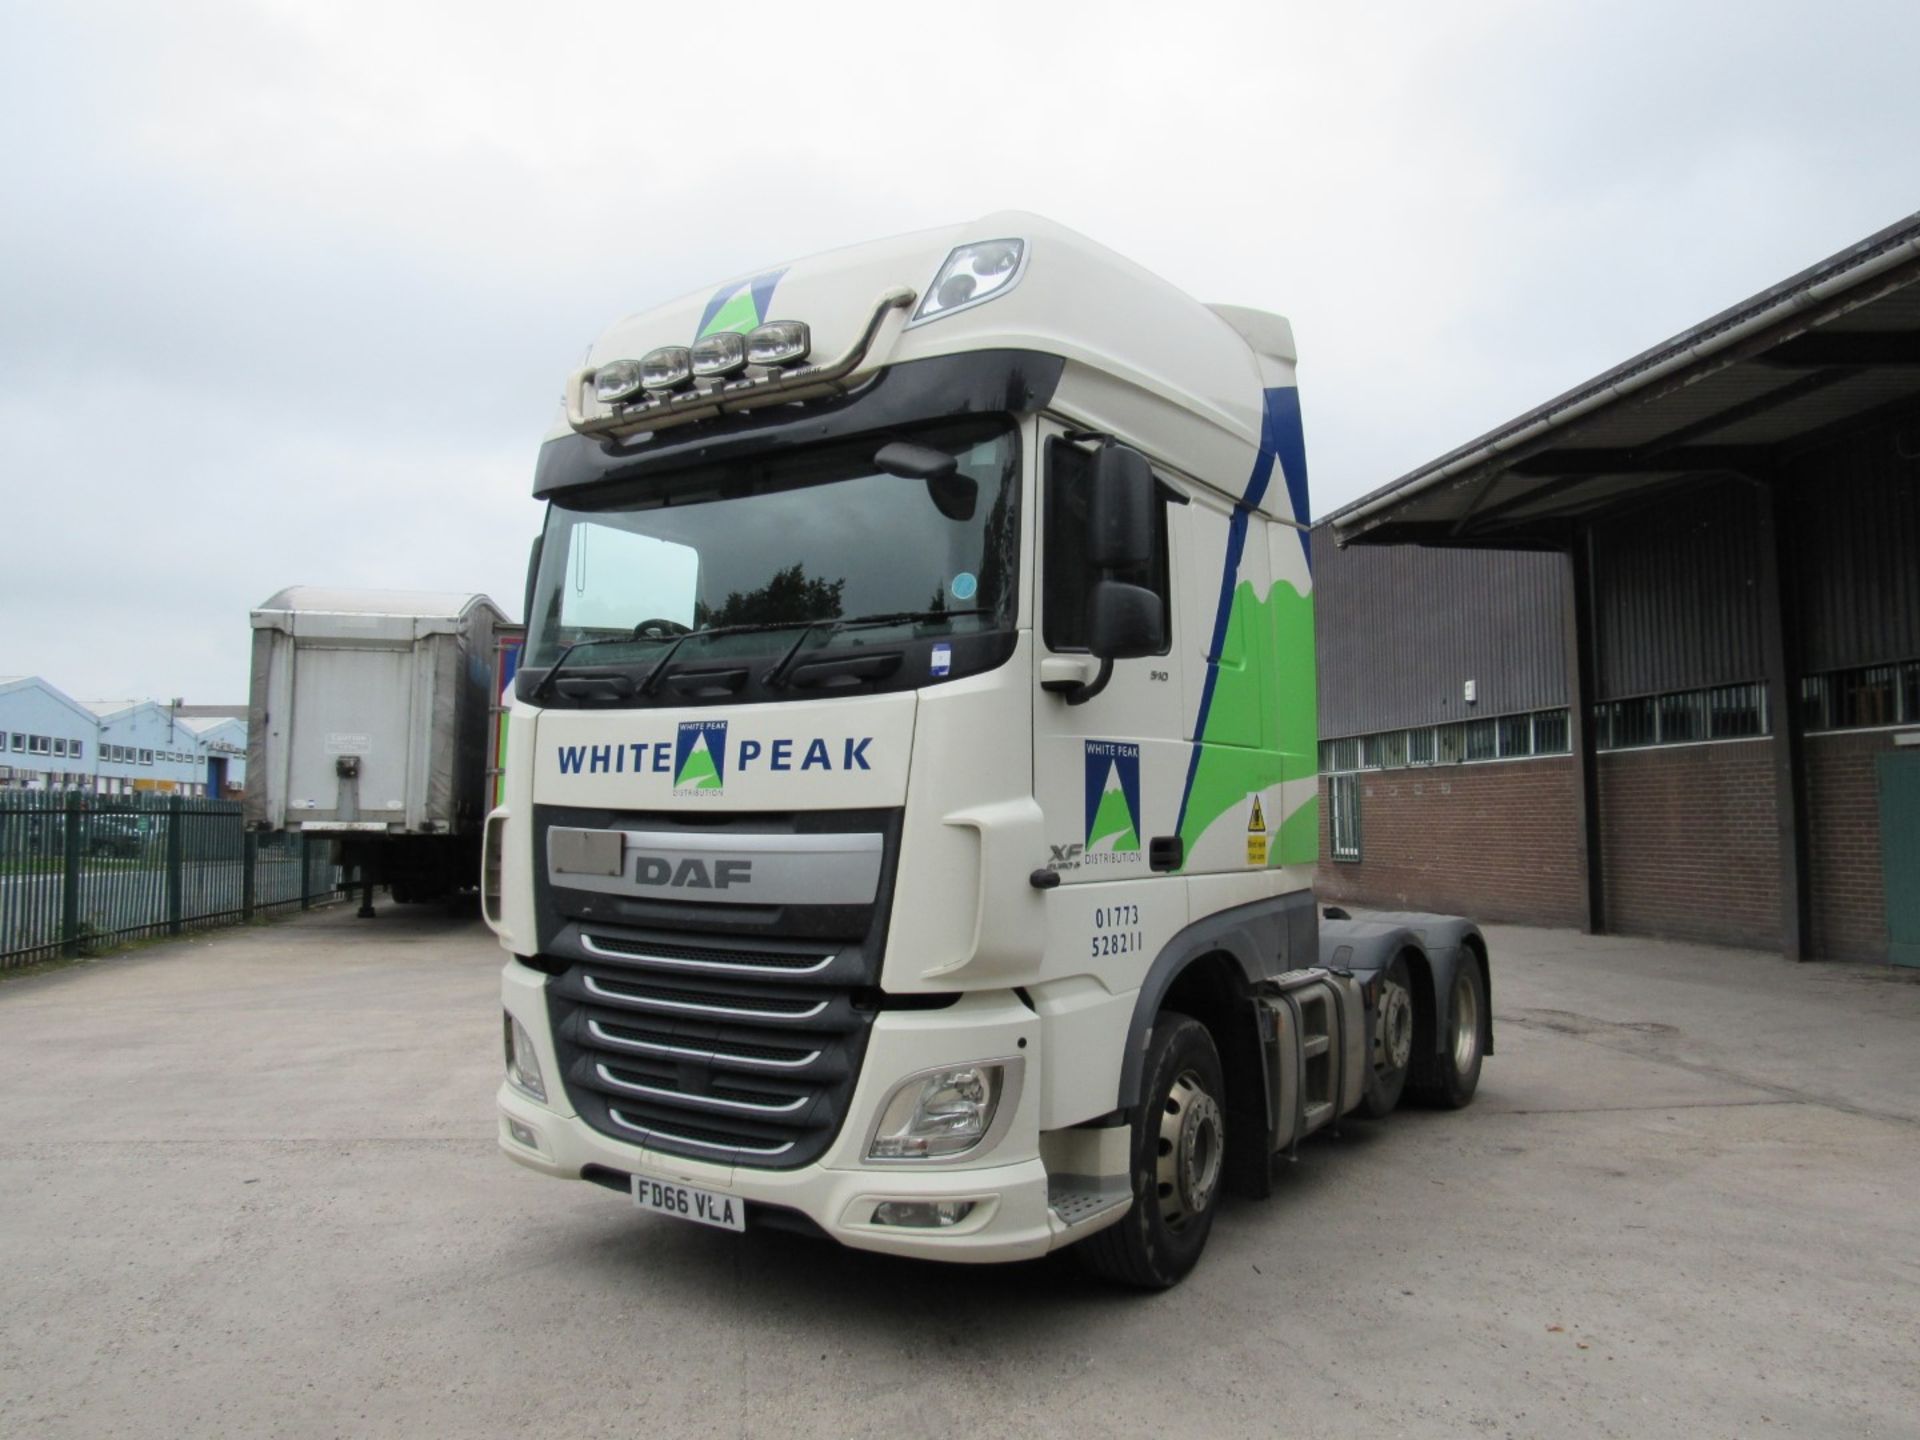 Daf FTG XF:510 6x2 Euro 6 Super space cab tractor - Image 4 of 26